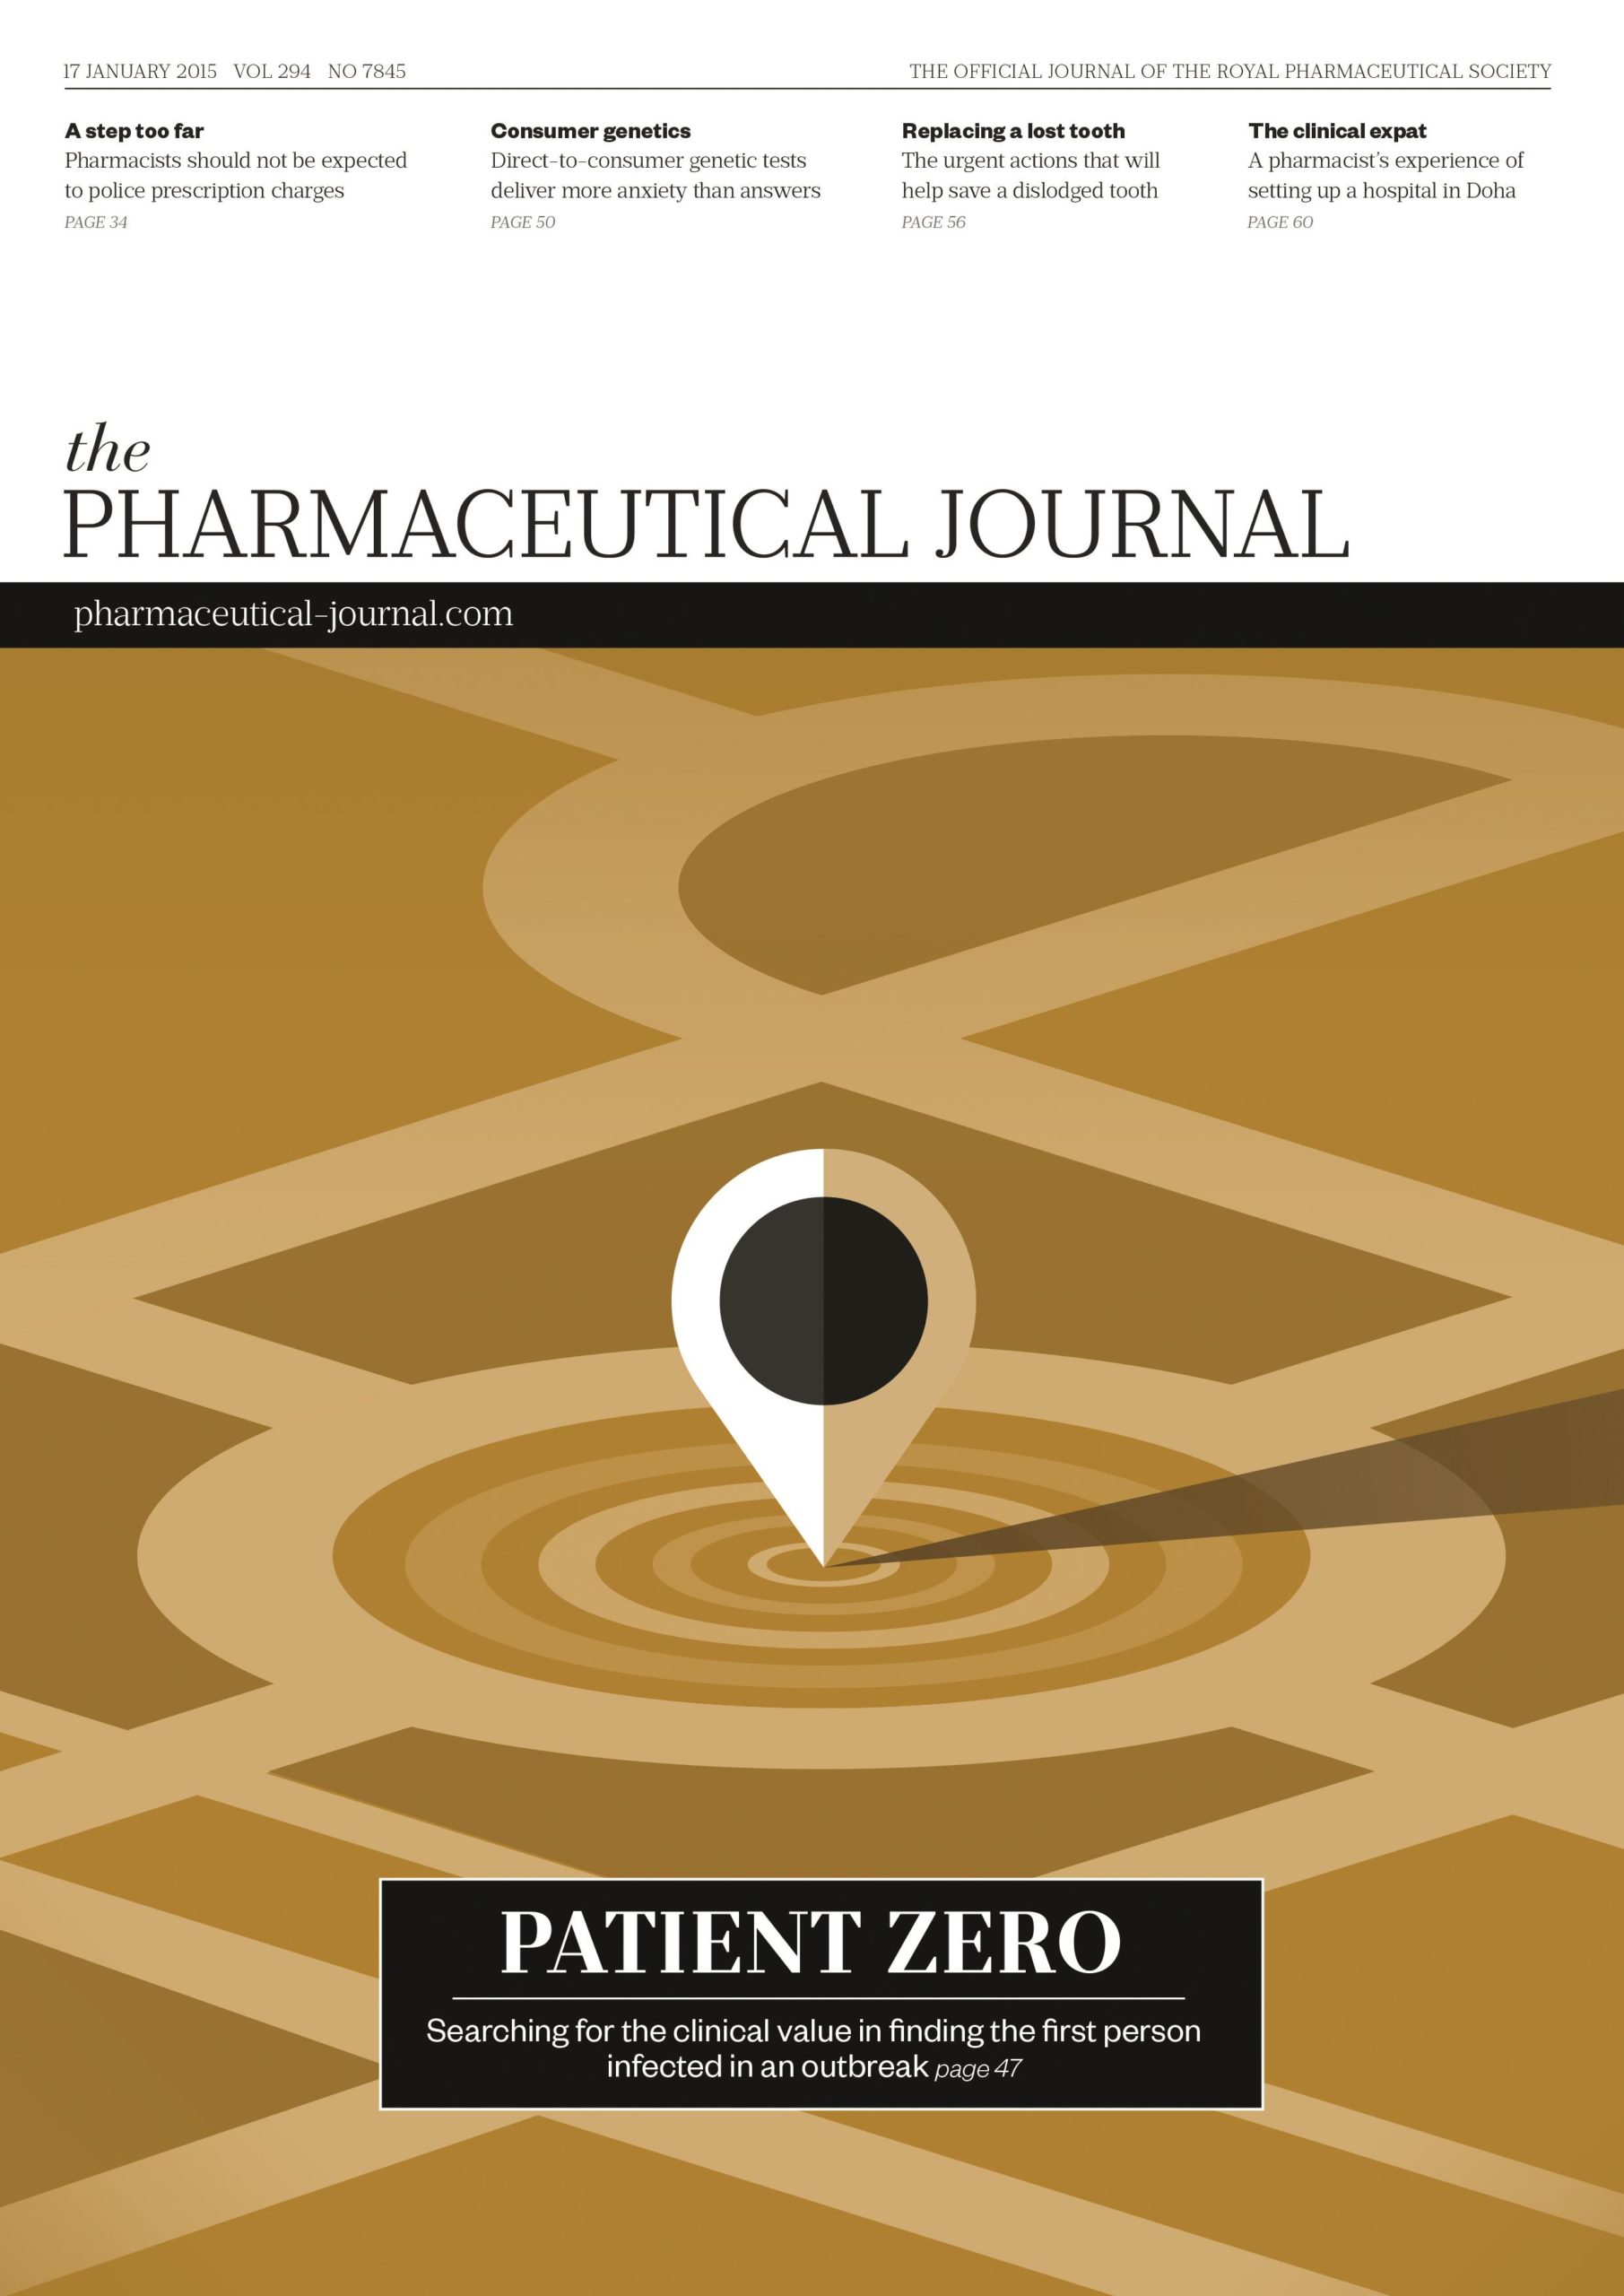 Publication issue cover for PJ, 17 January 2015, Vol 294, No 7845